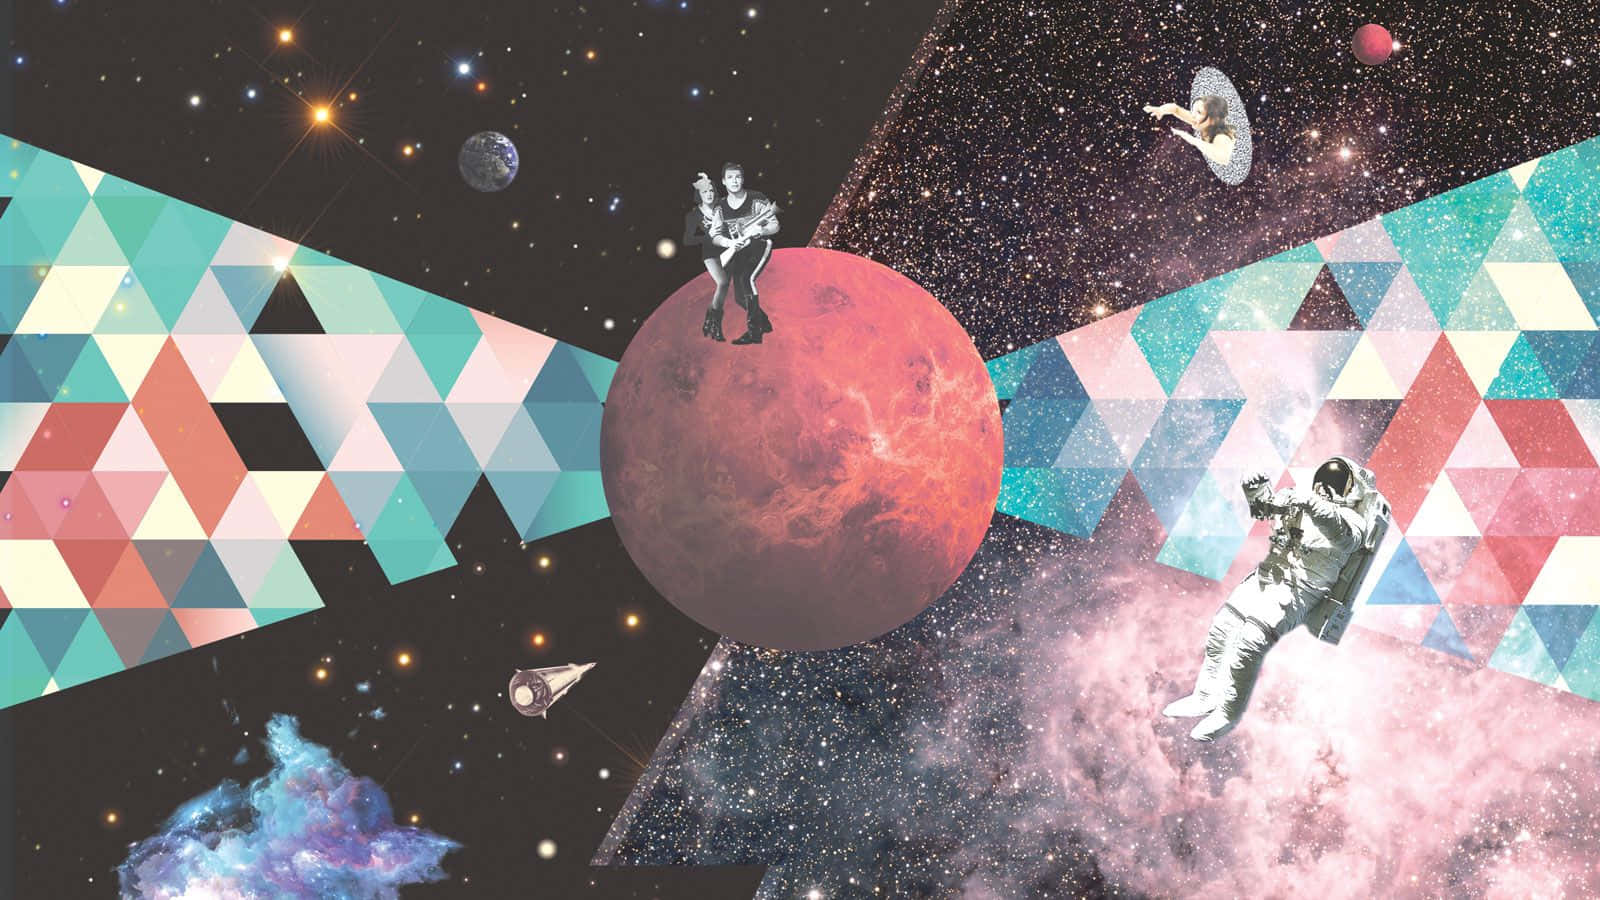 Wow! Is that a trippy astronaut in space? Wallpaper